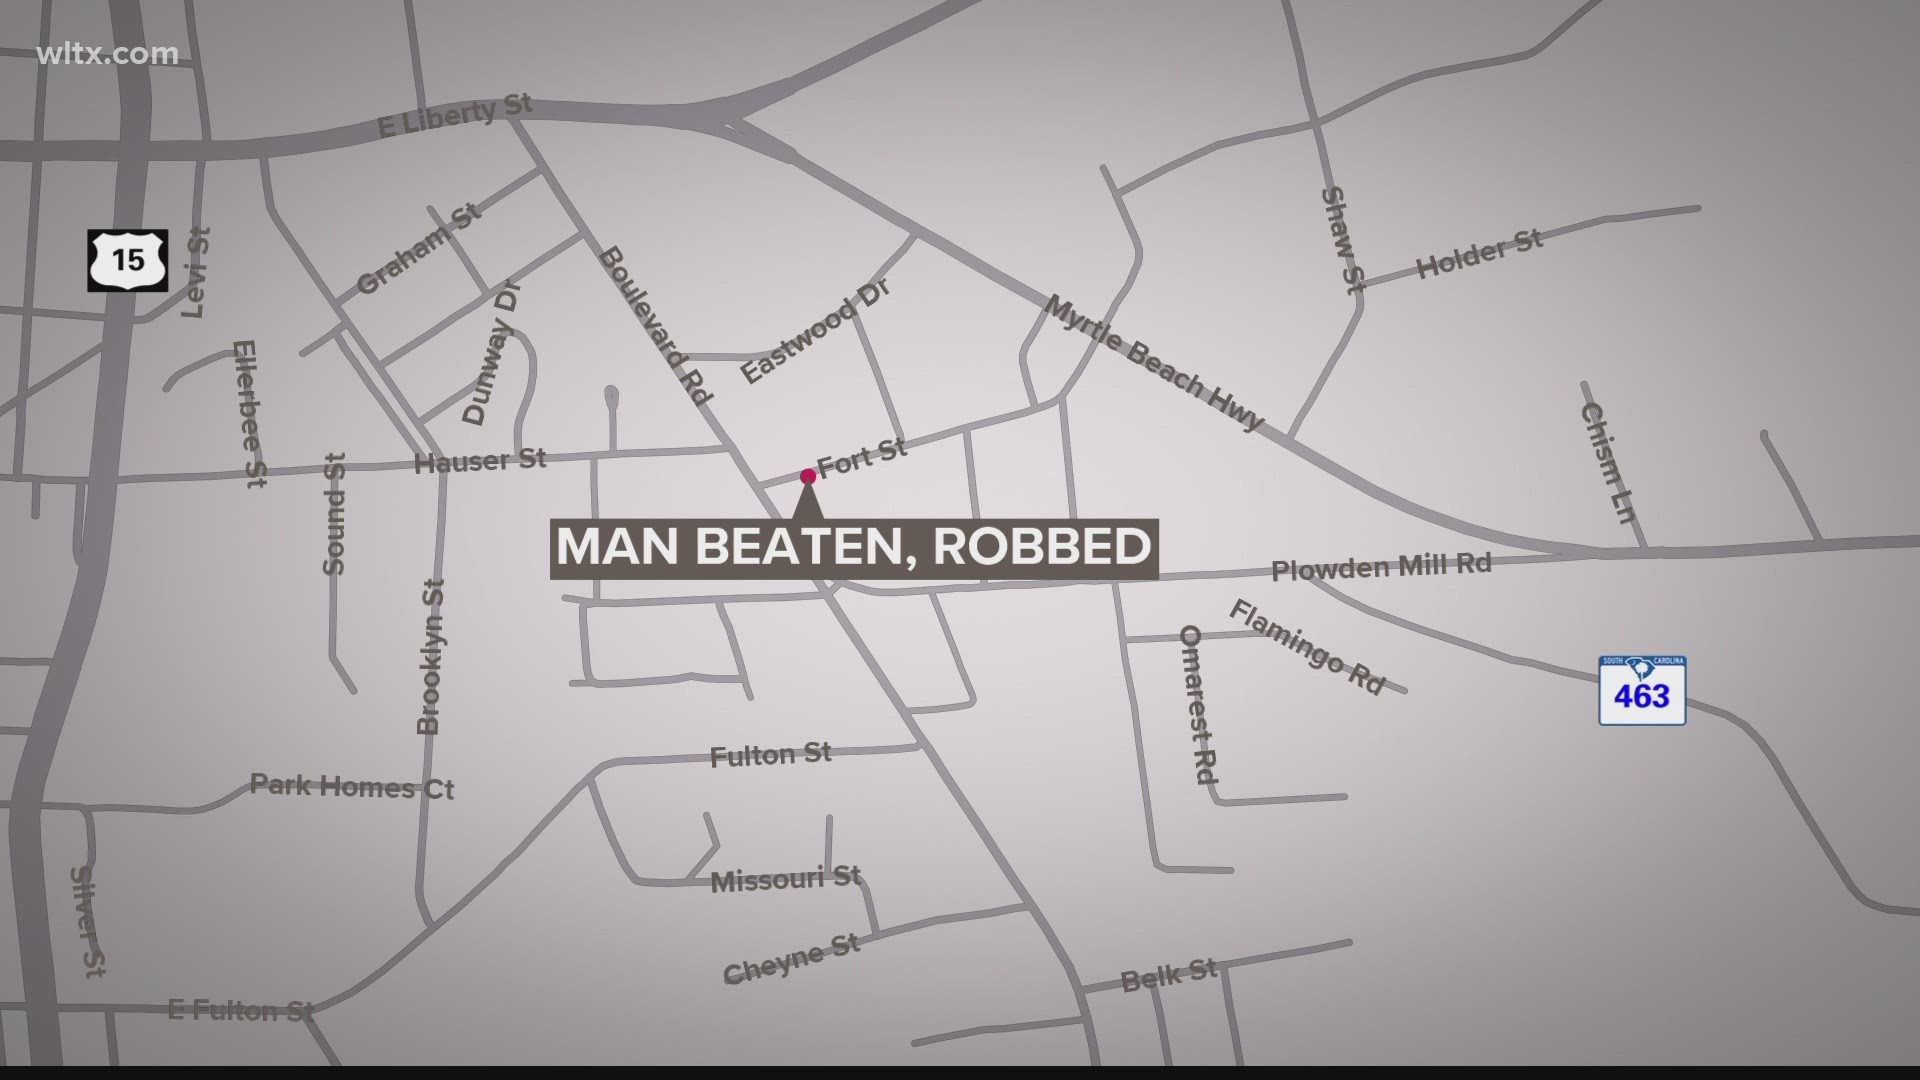 Sumter police say a 78-year-old man was beaten and robbed at the business he owns.